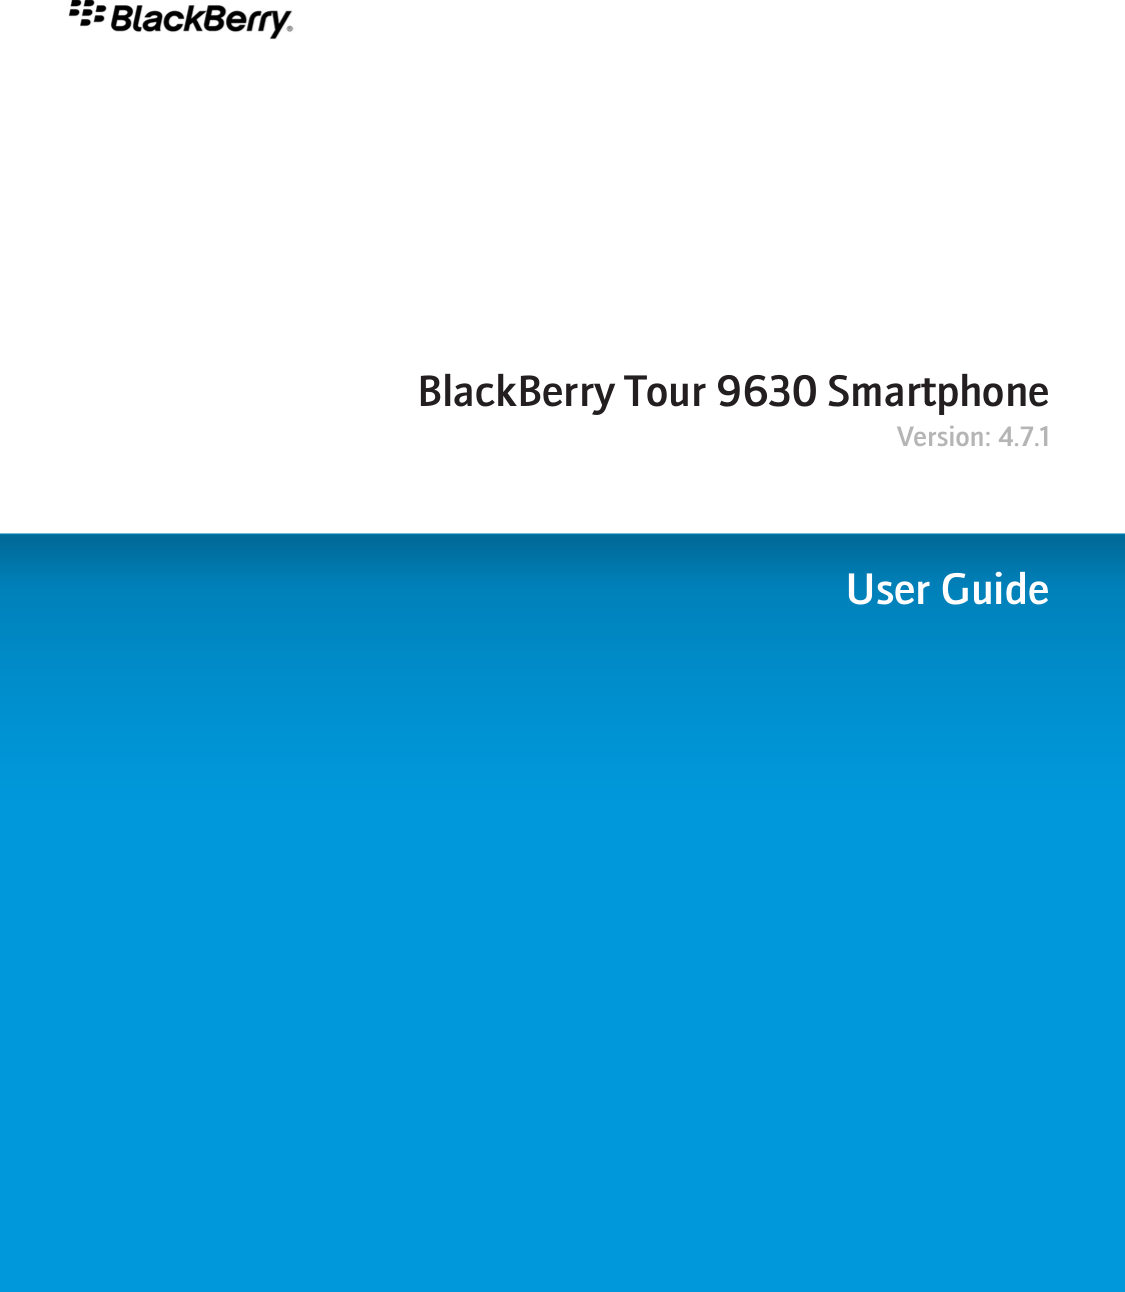 BlackBerry Tour 9630 SmartphoneVersion: 4.7.1User Guide